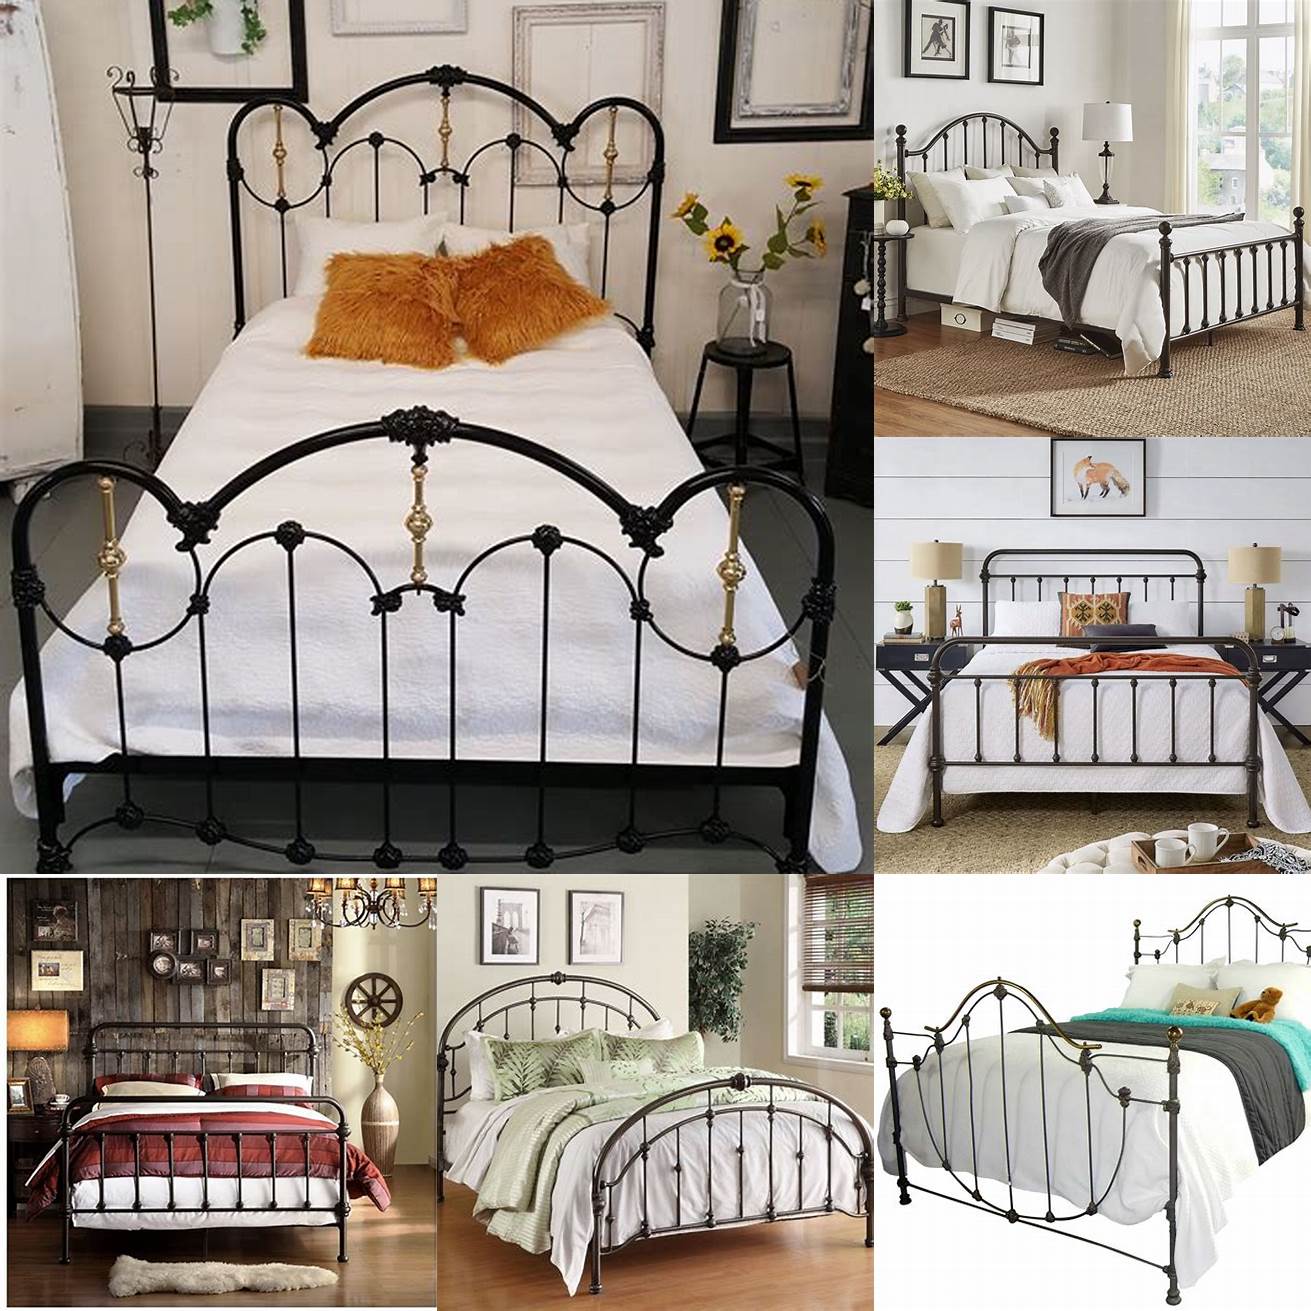 Iron bed frame queen with vintage rug and antique accessories